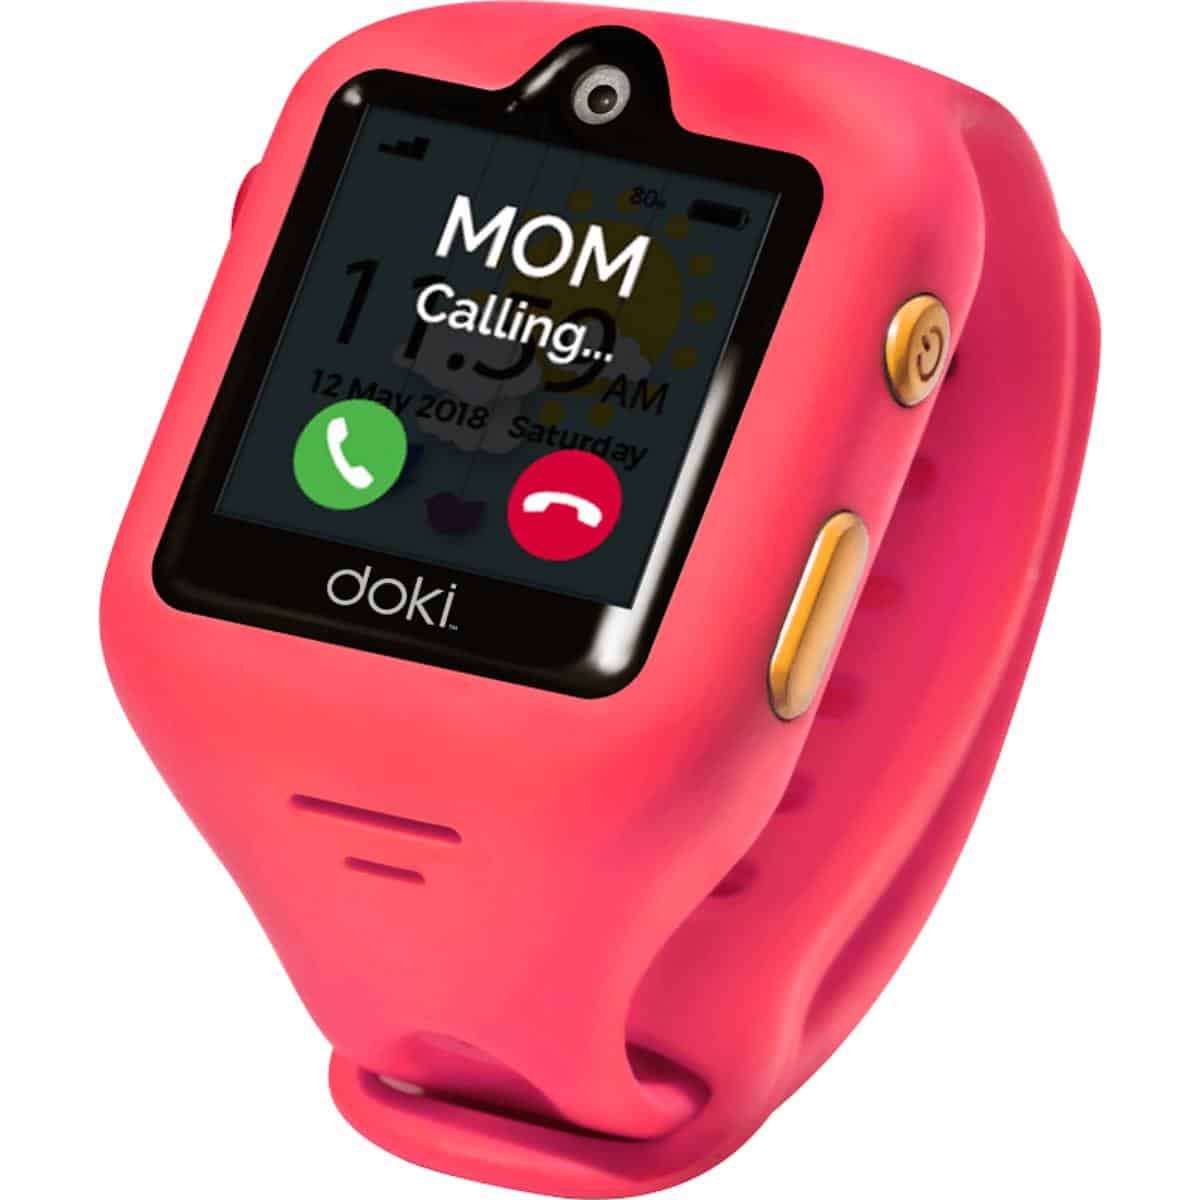 Doki Watch S | Best GPS-Enabled Kids Watches | Child Safety For The Modern Family